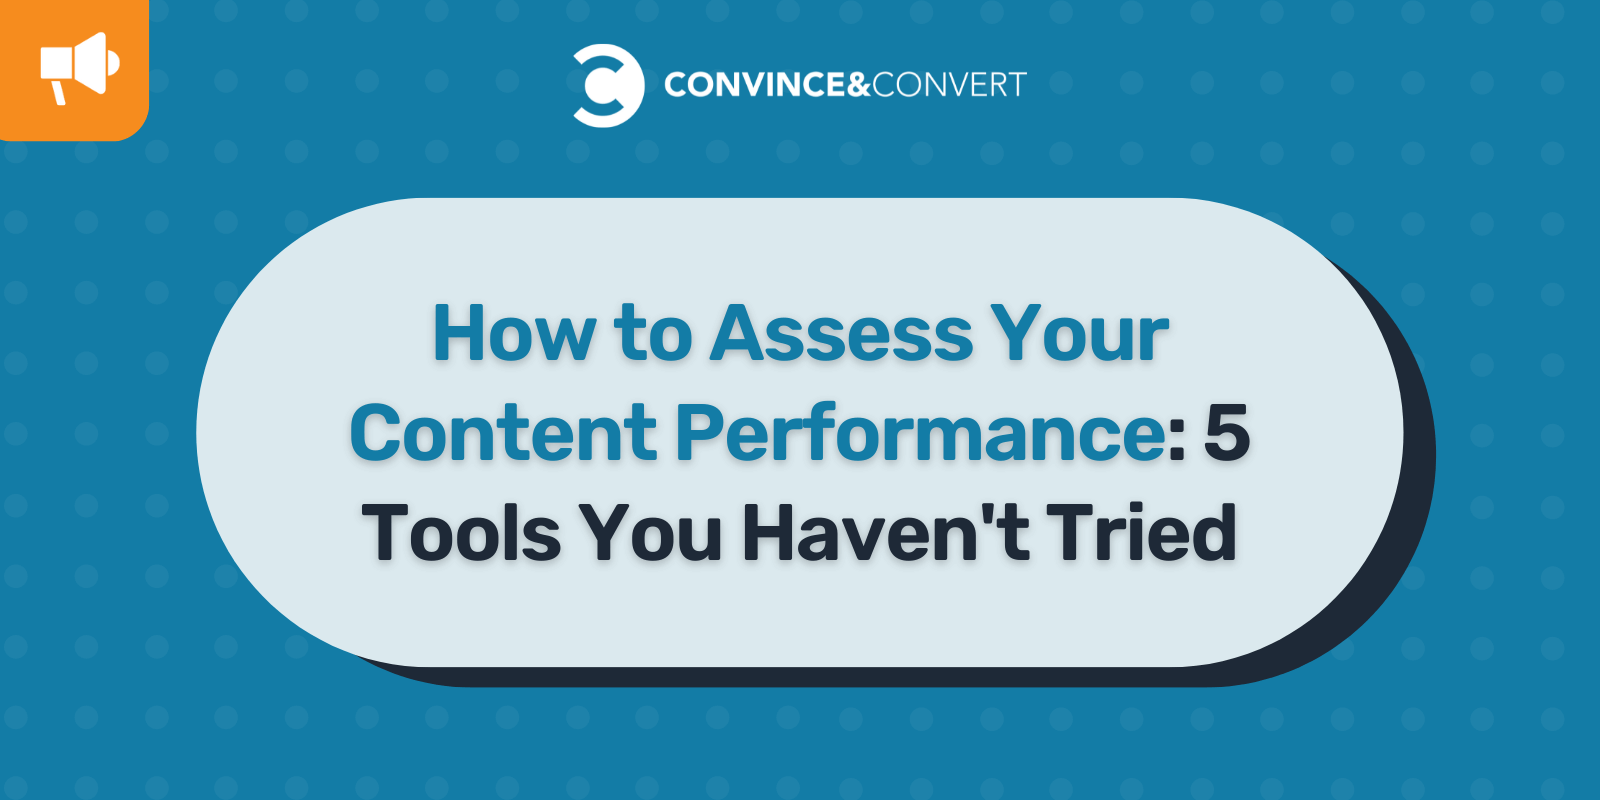 How to Assess Your Content Performance: 5 Tools You Haven’t Tried